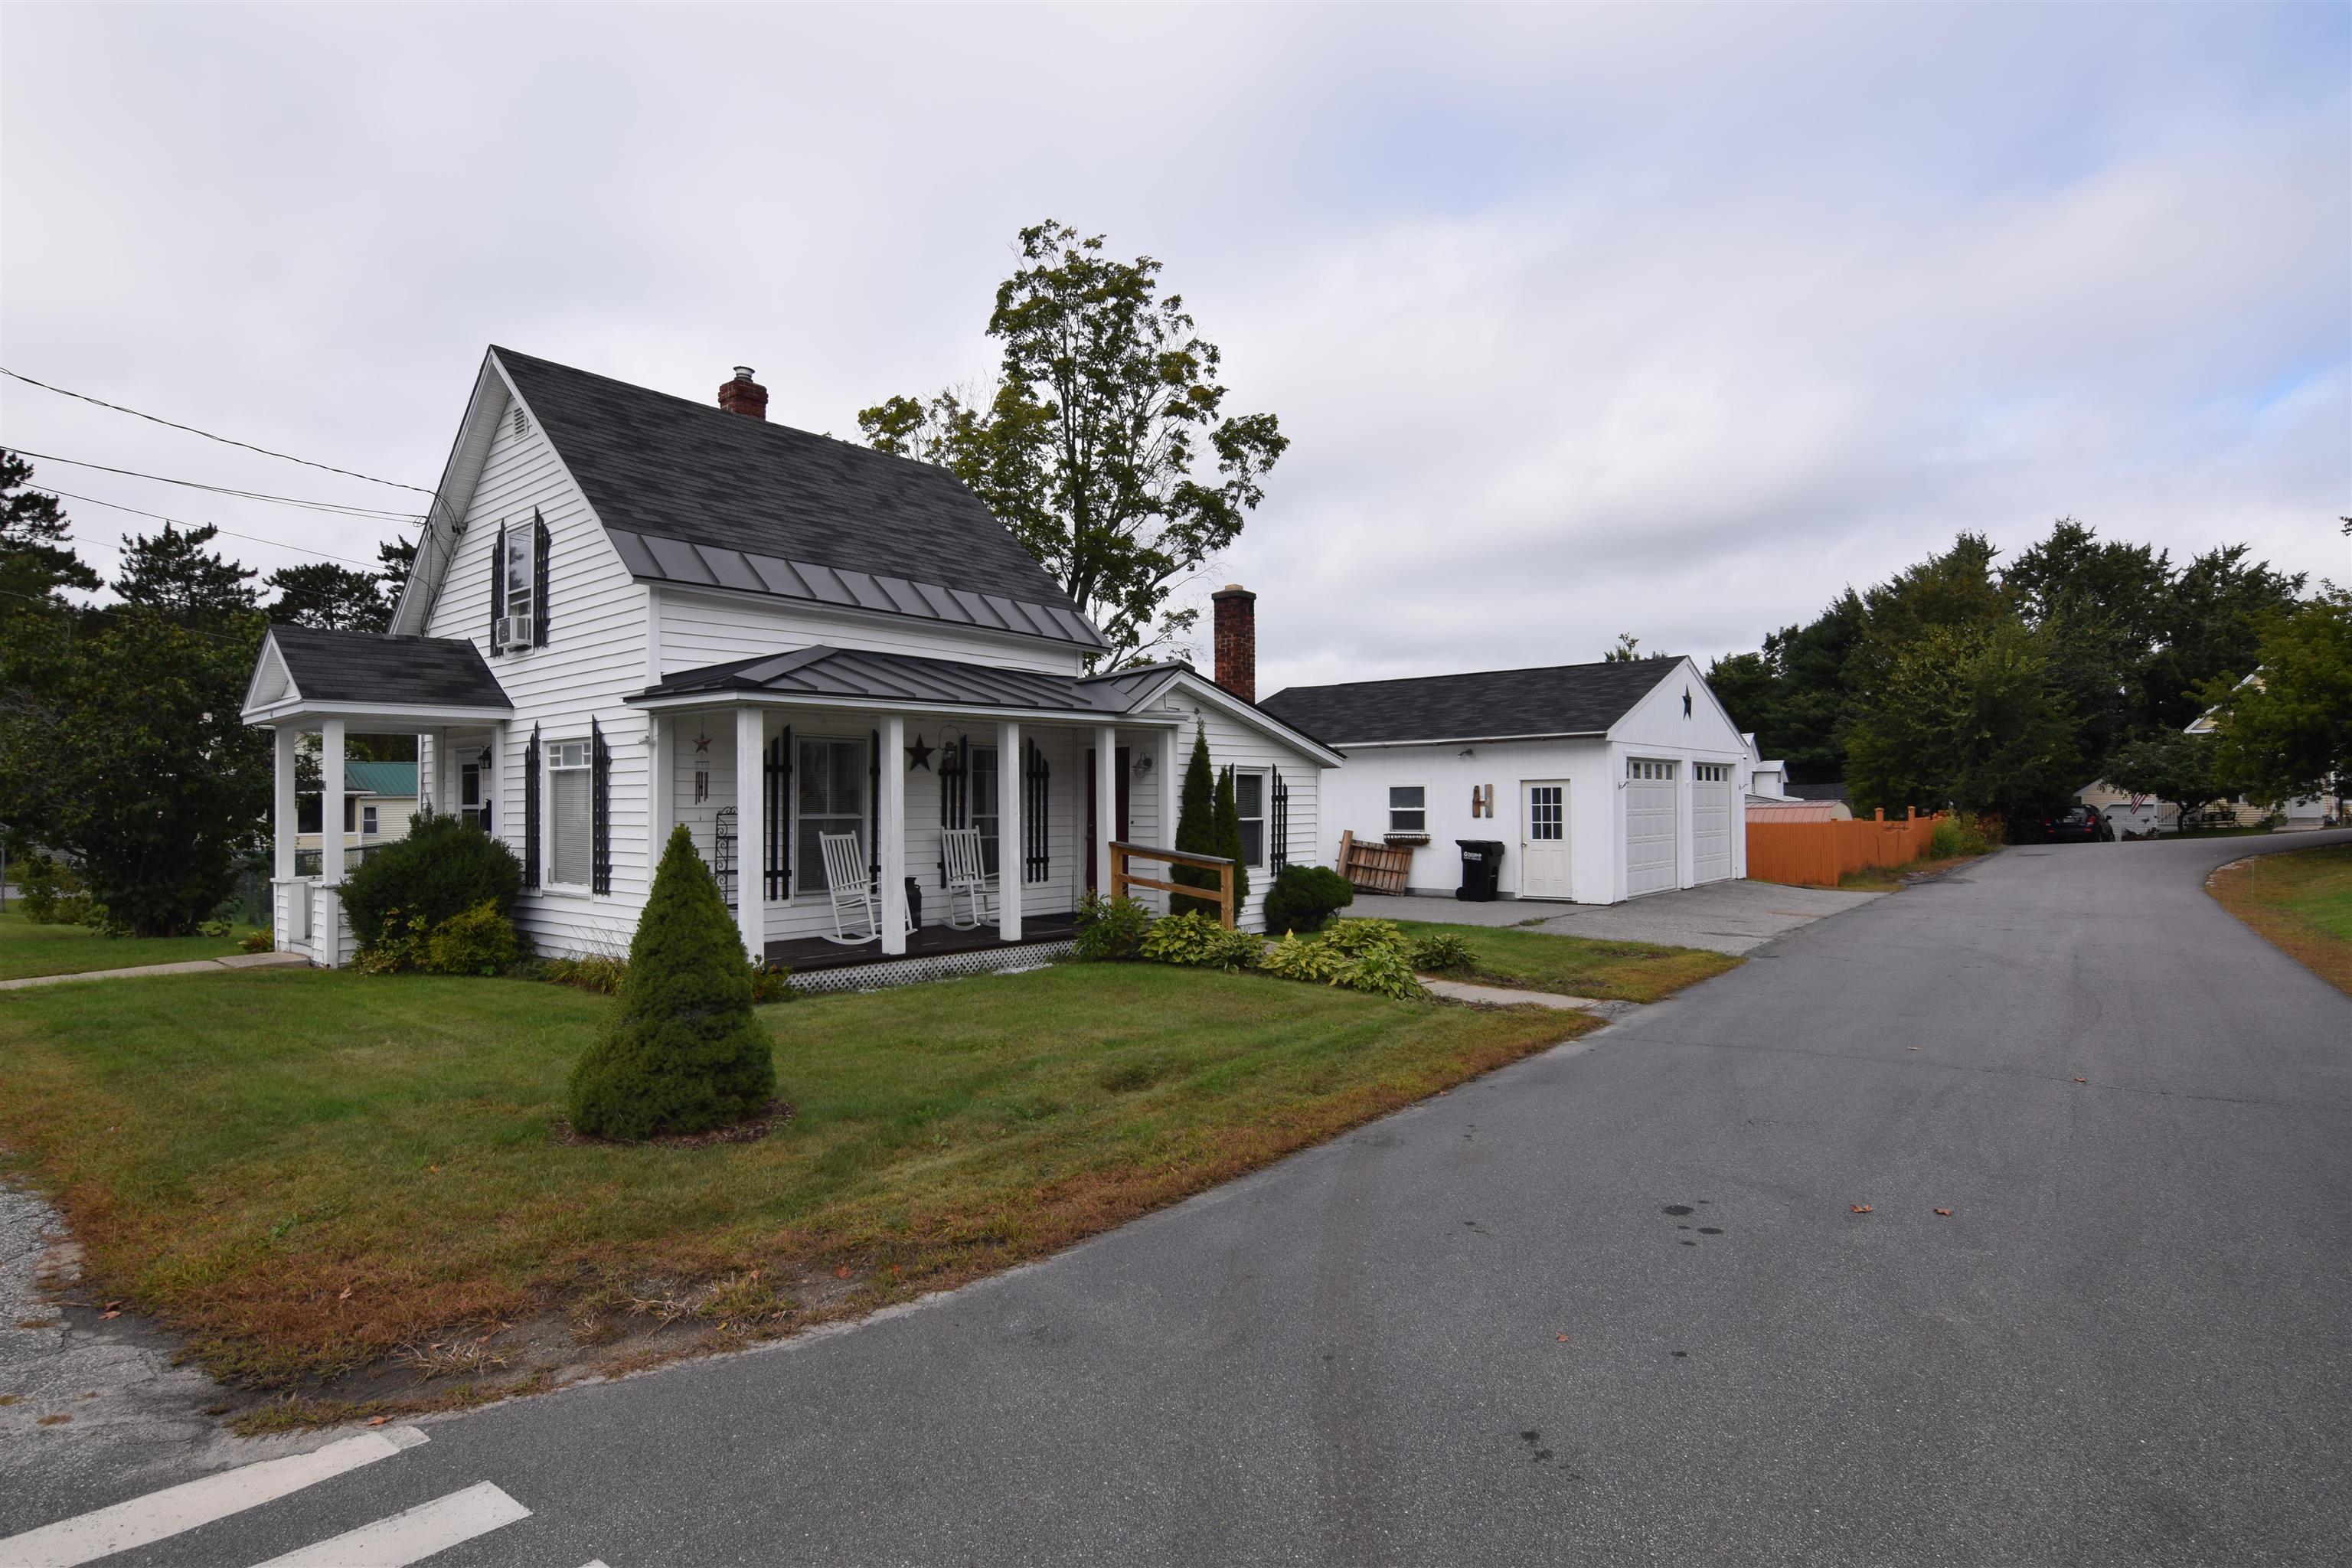 NEWPORT NH Homes for sale